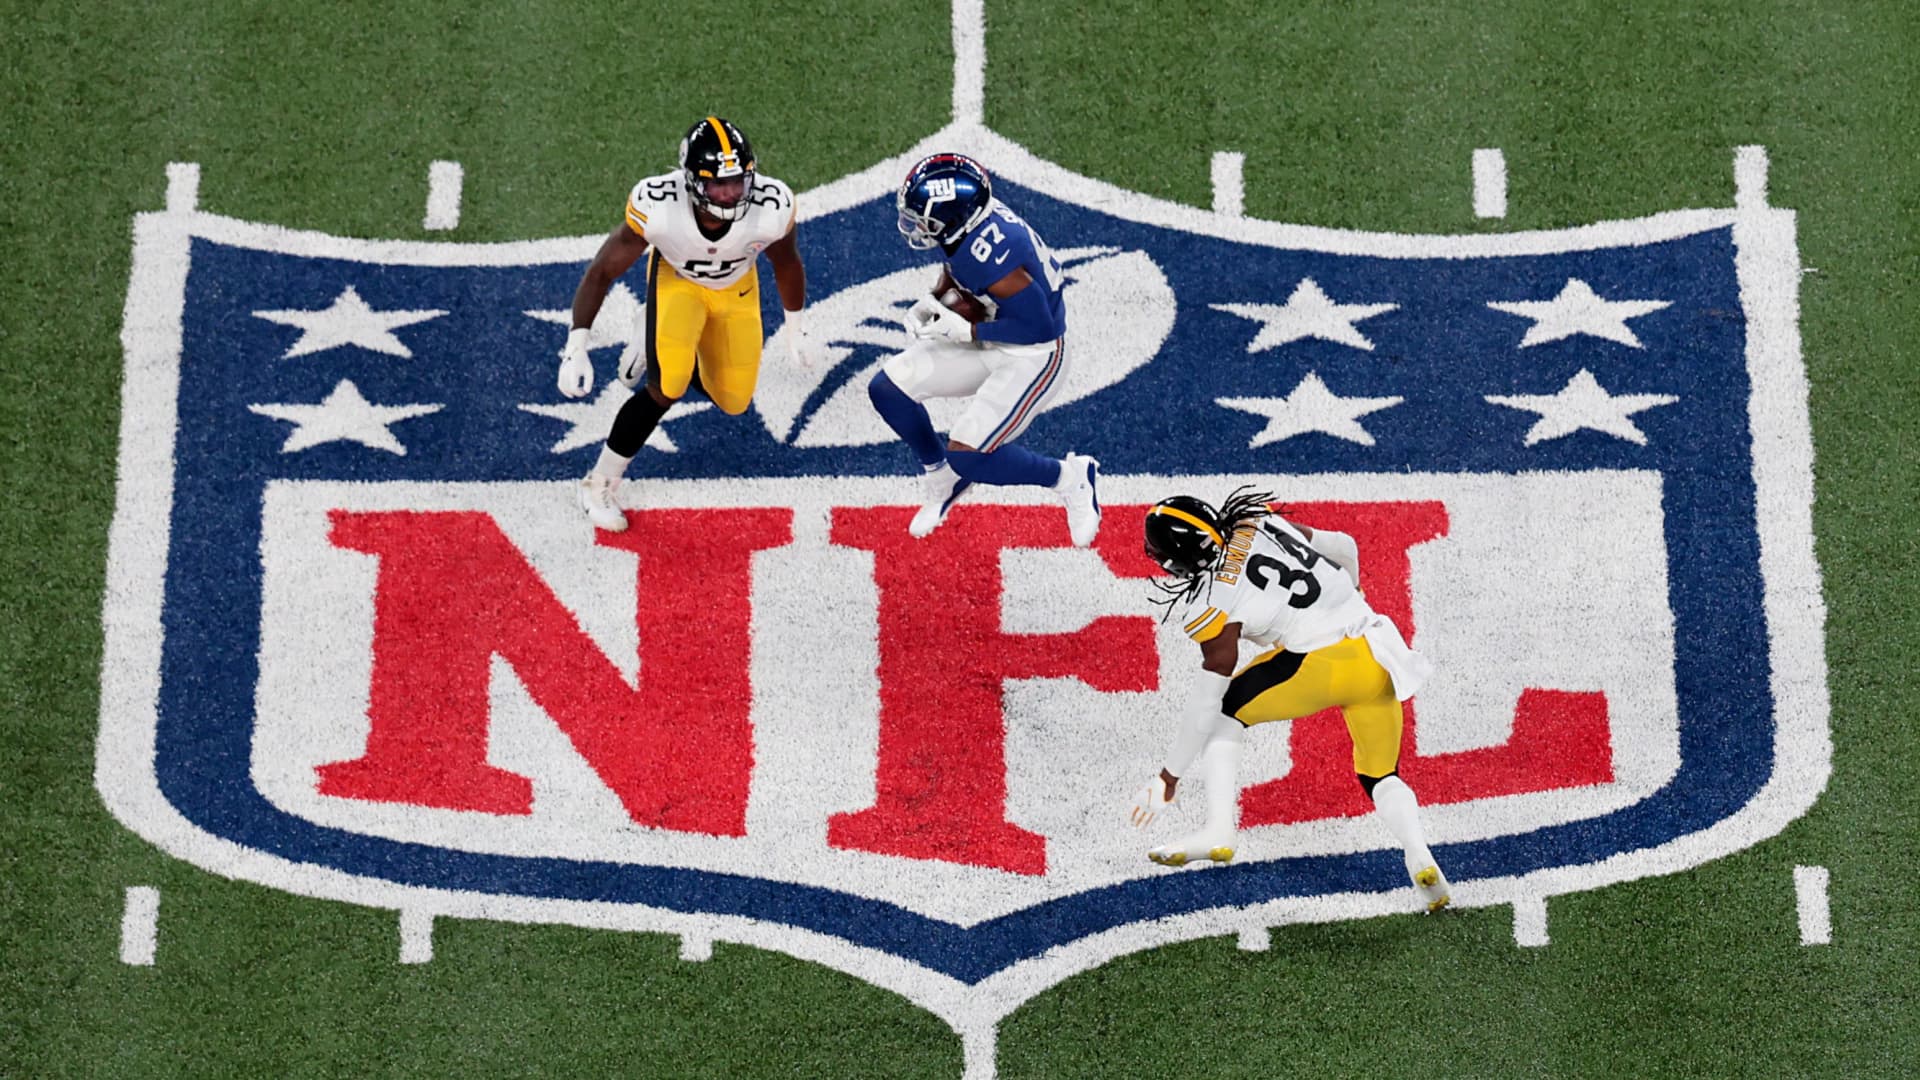 The NFL will now let teams seek limited blockchain sponsorships, but cryptocurre..